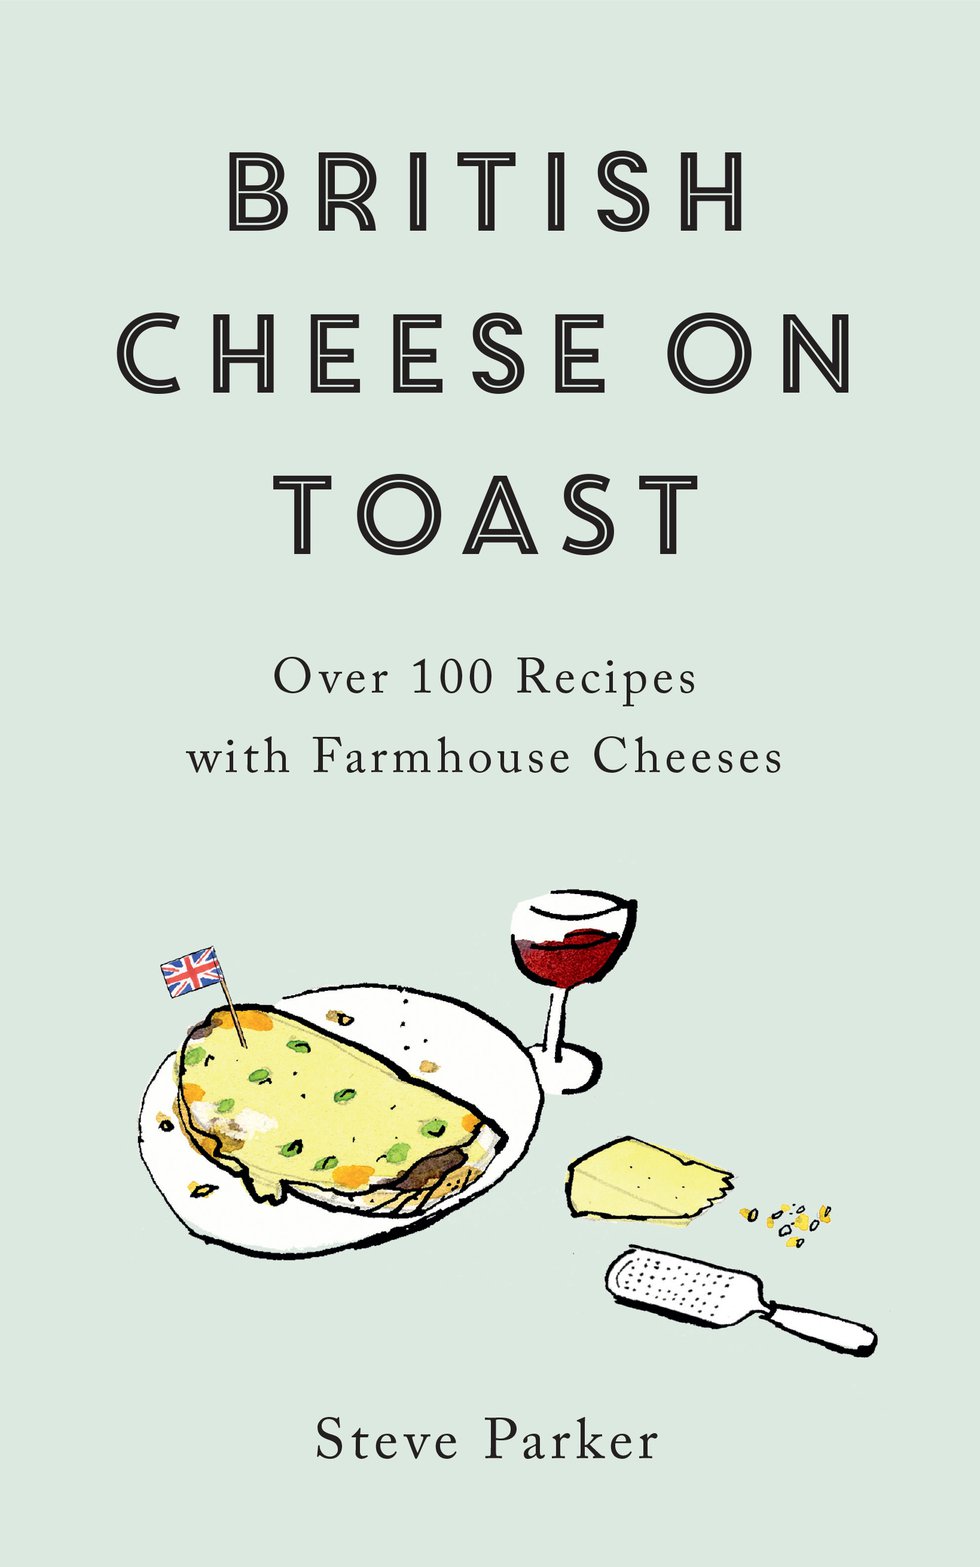 British Cheese on Toast by Steve Parker.jpg